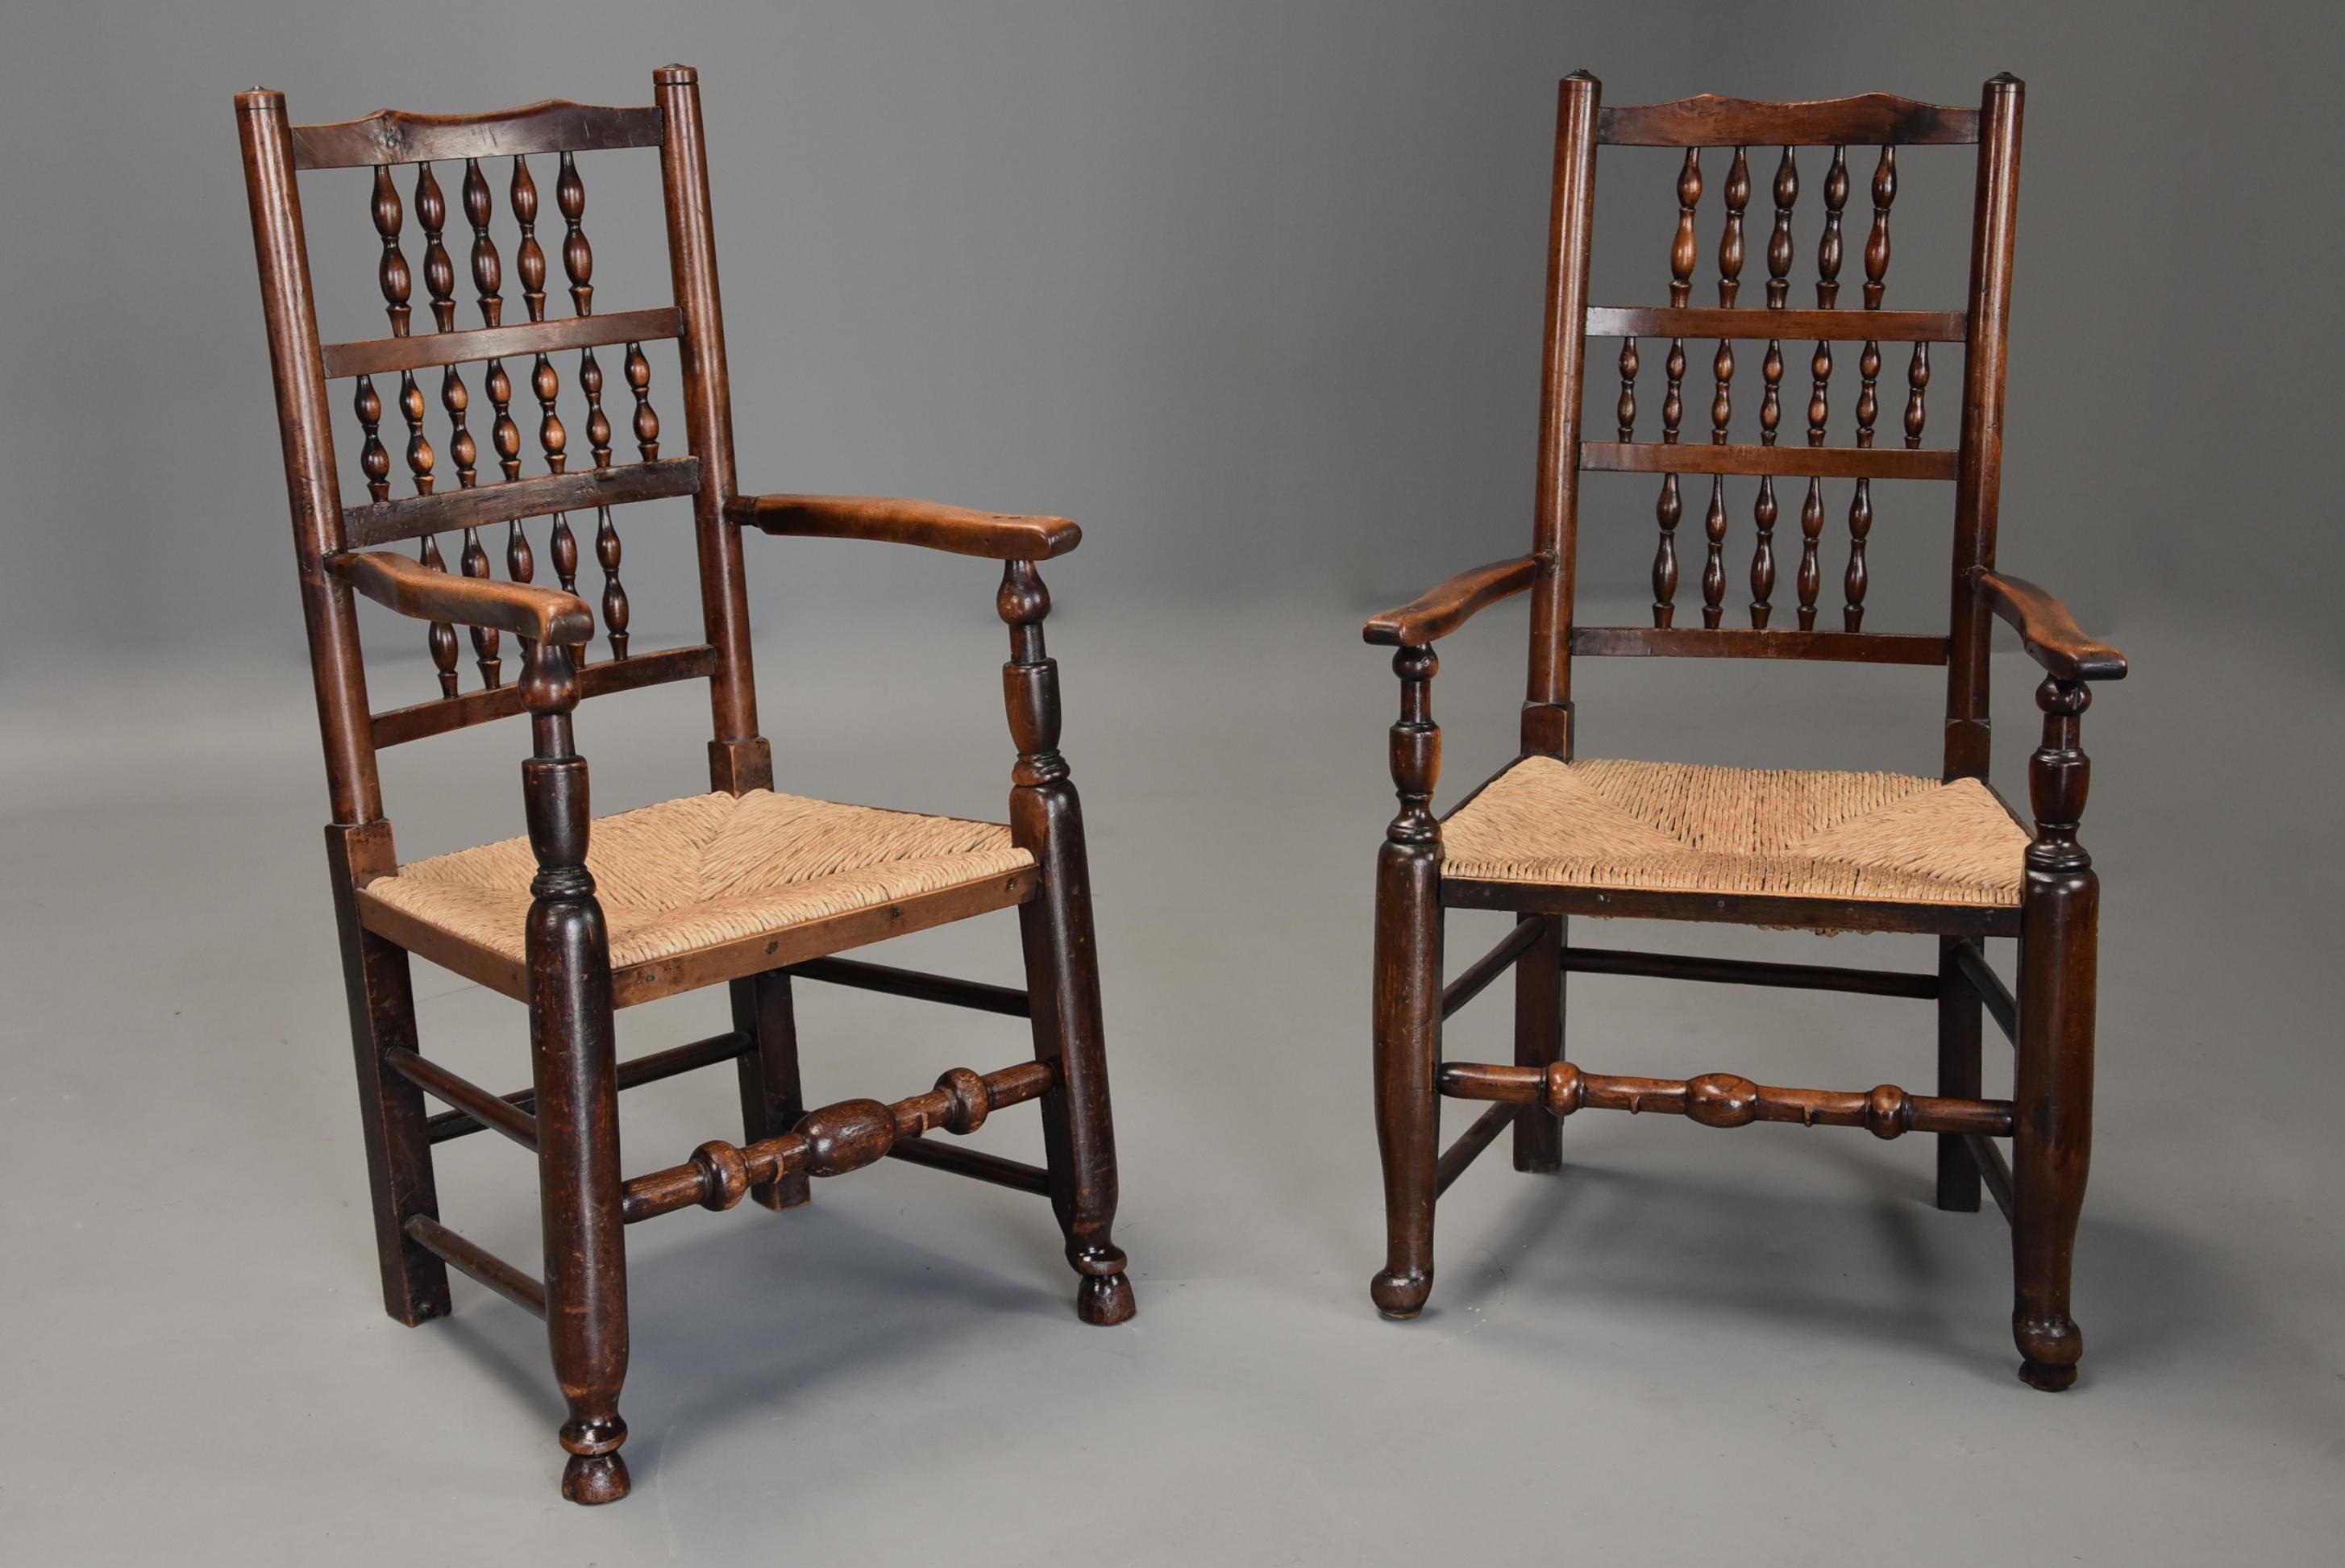 Matched Set of Eight Mid-19th Century Ash Spindle Back Chairs of Superb Patina For Sale 1